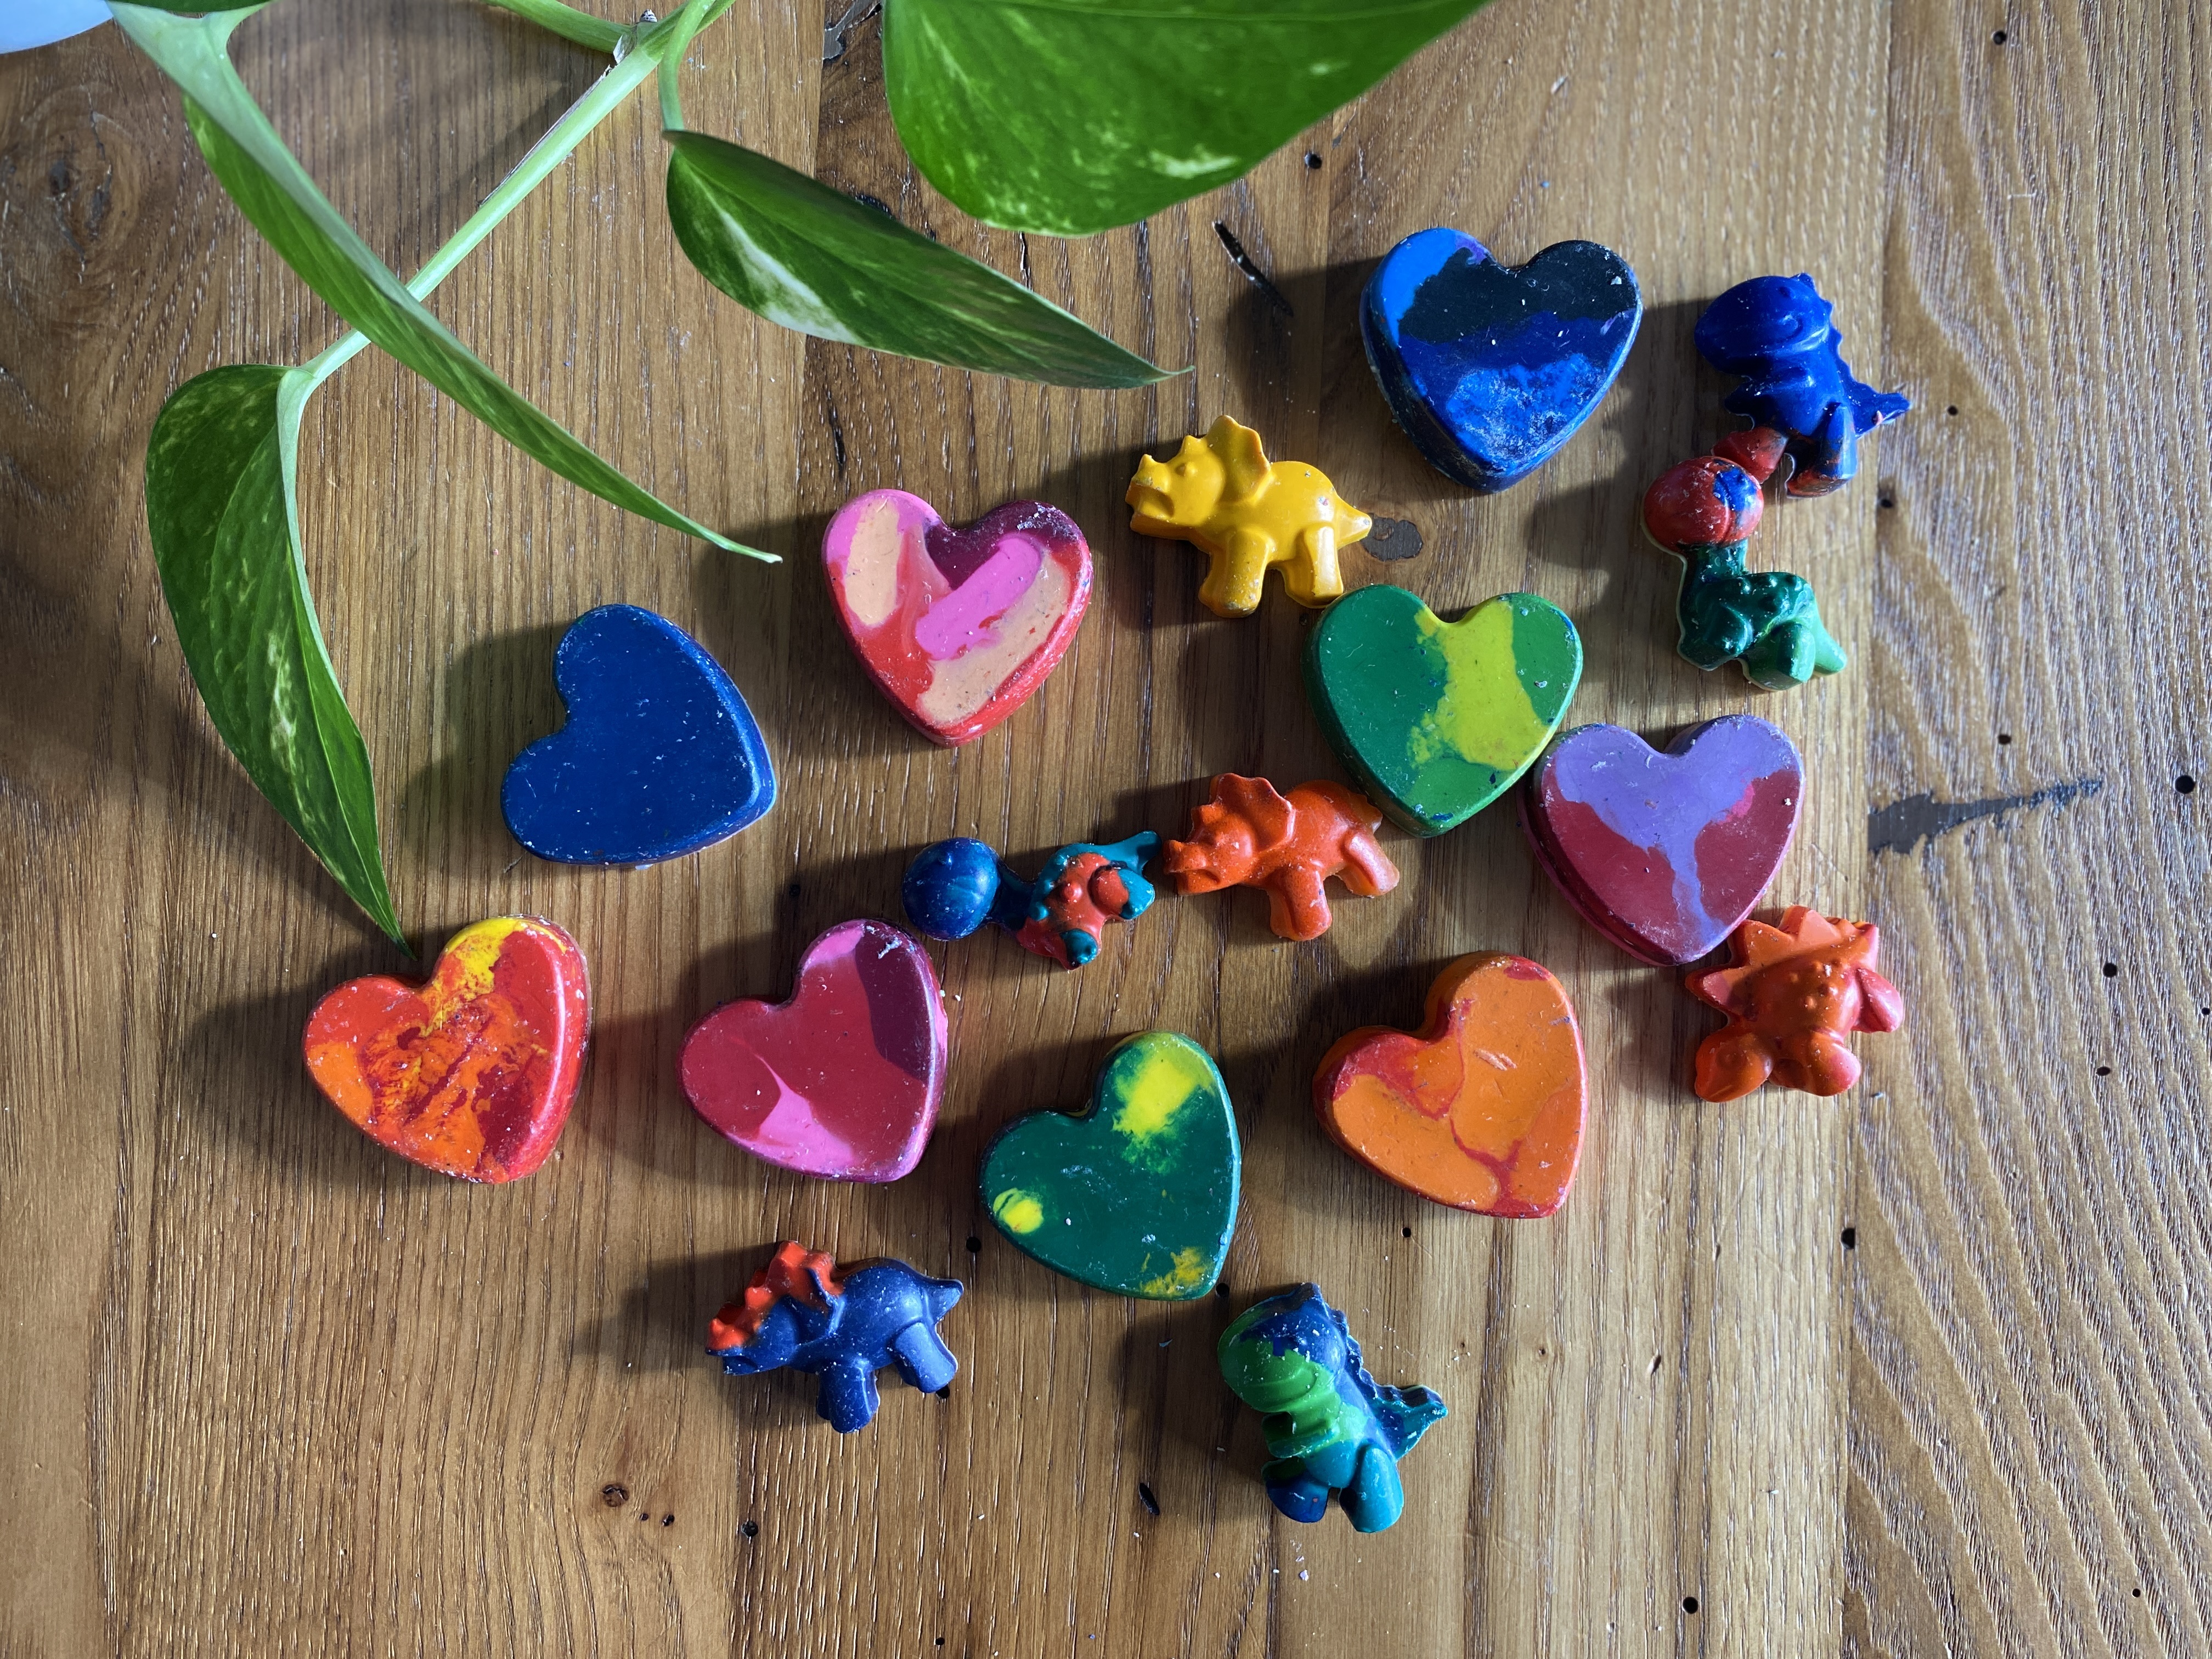 How to Upcycle Old Crayons into Cute Valentine’s Day Party Favors for Kids